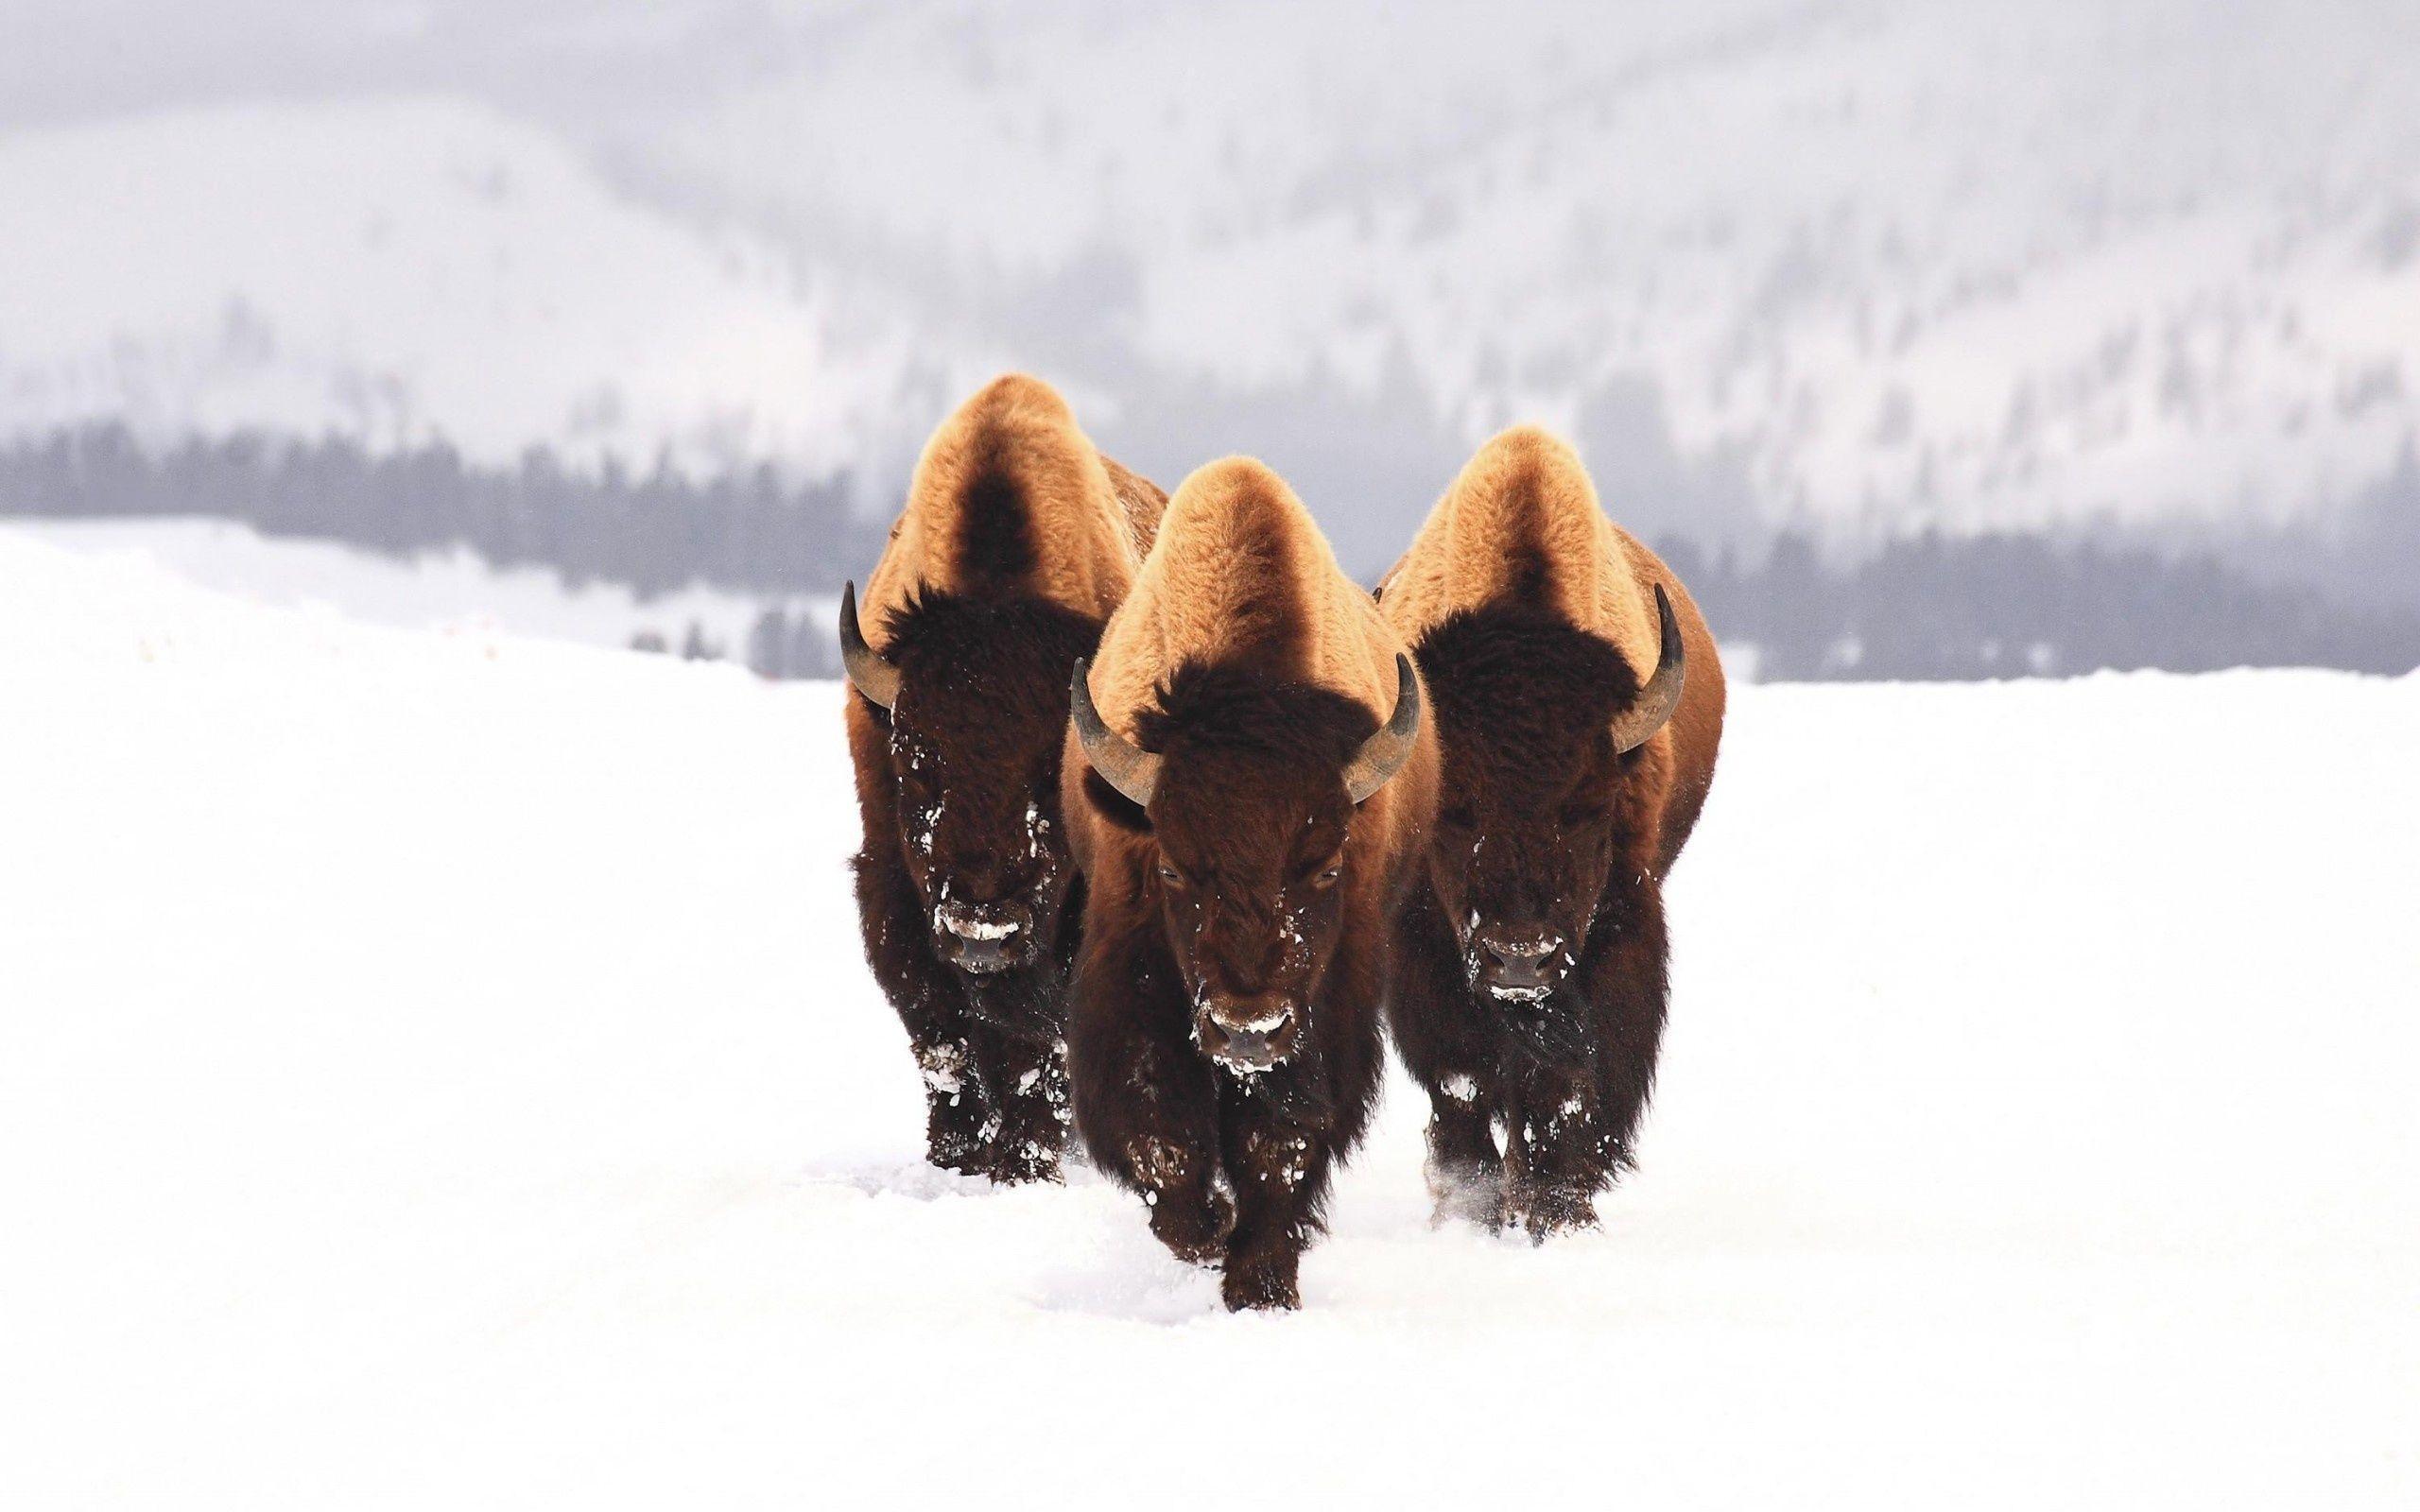 Wallpaper For – American Bison Wallpapers